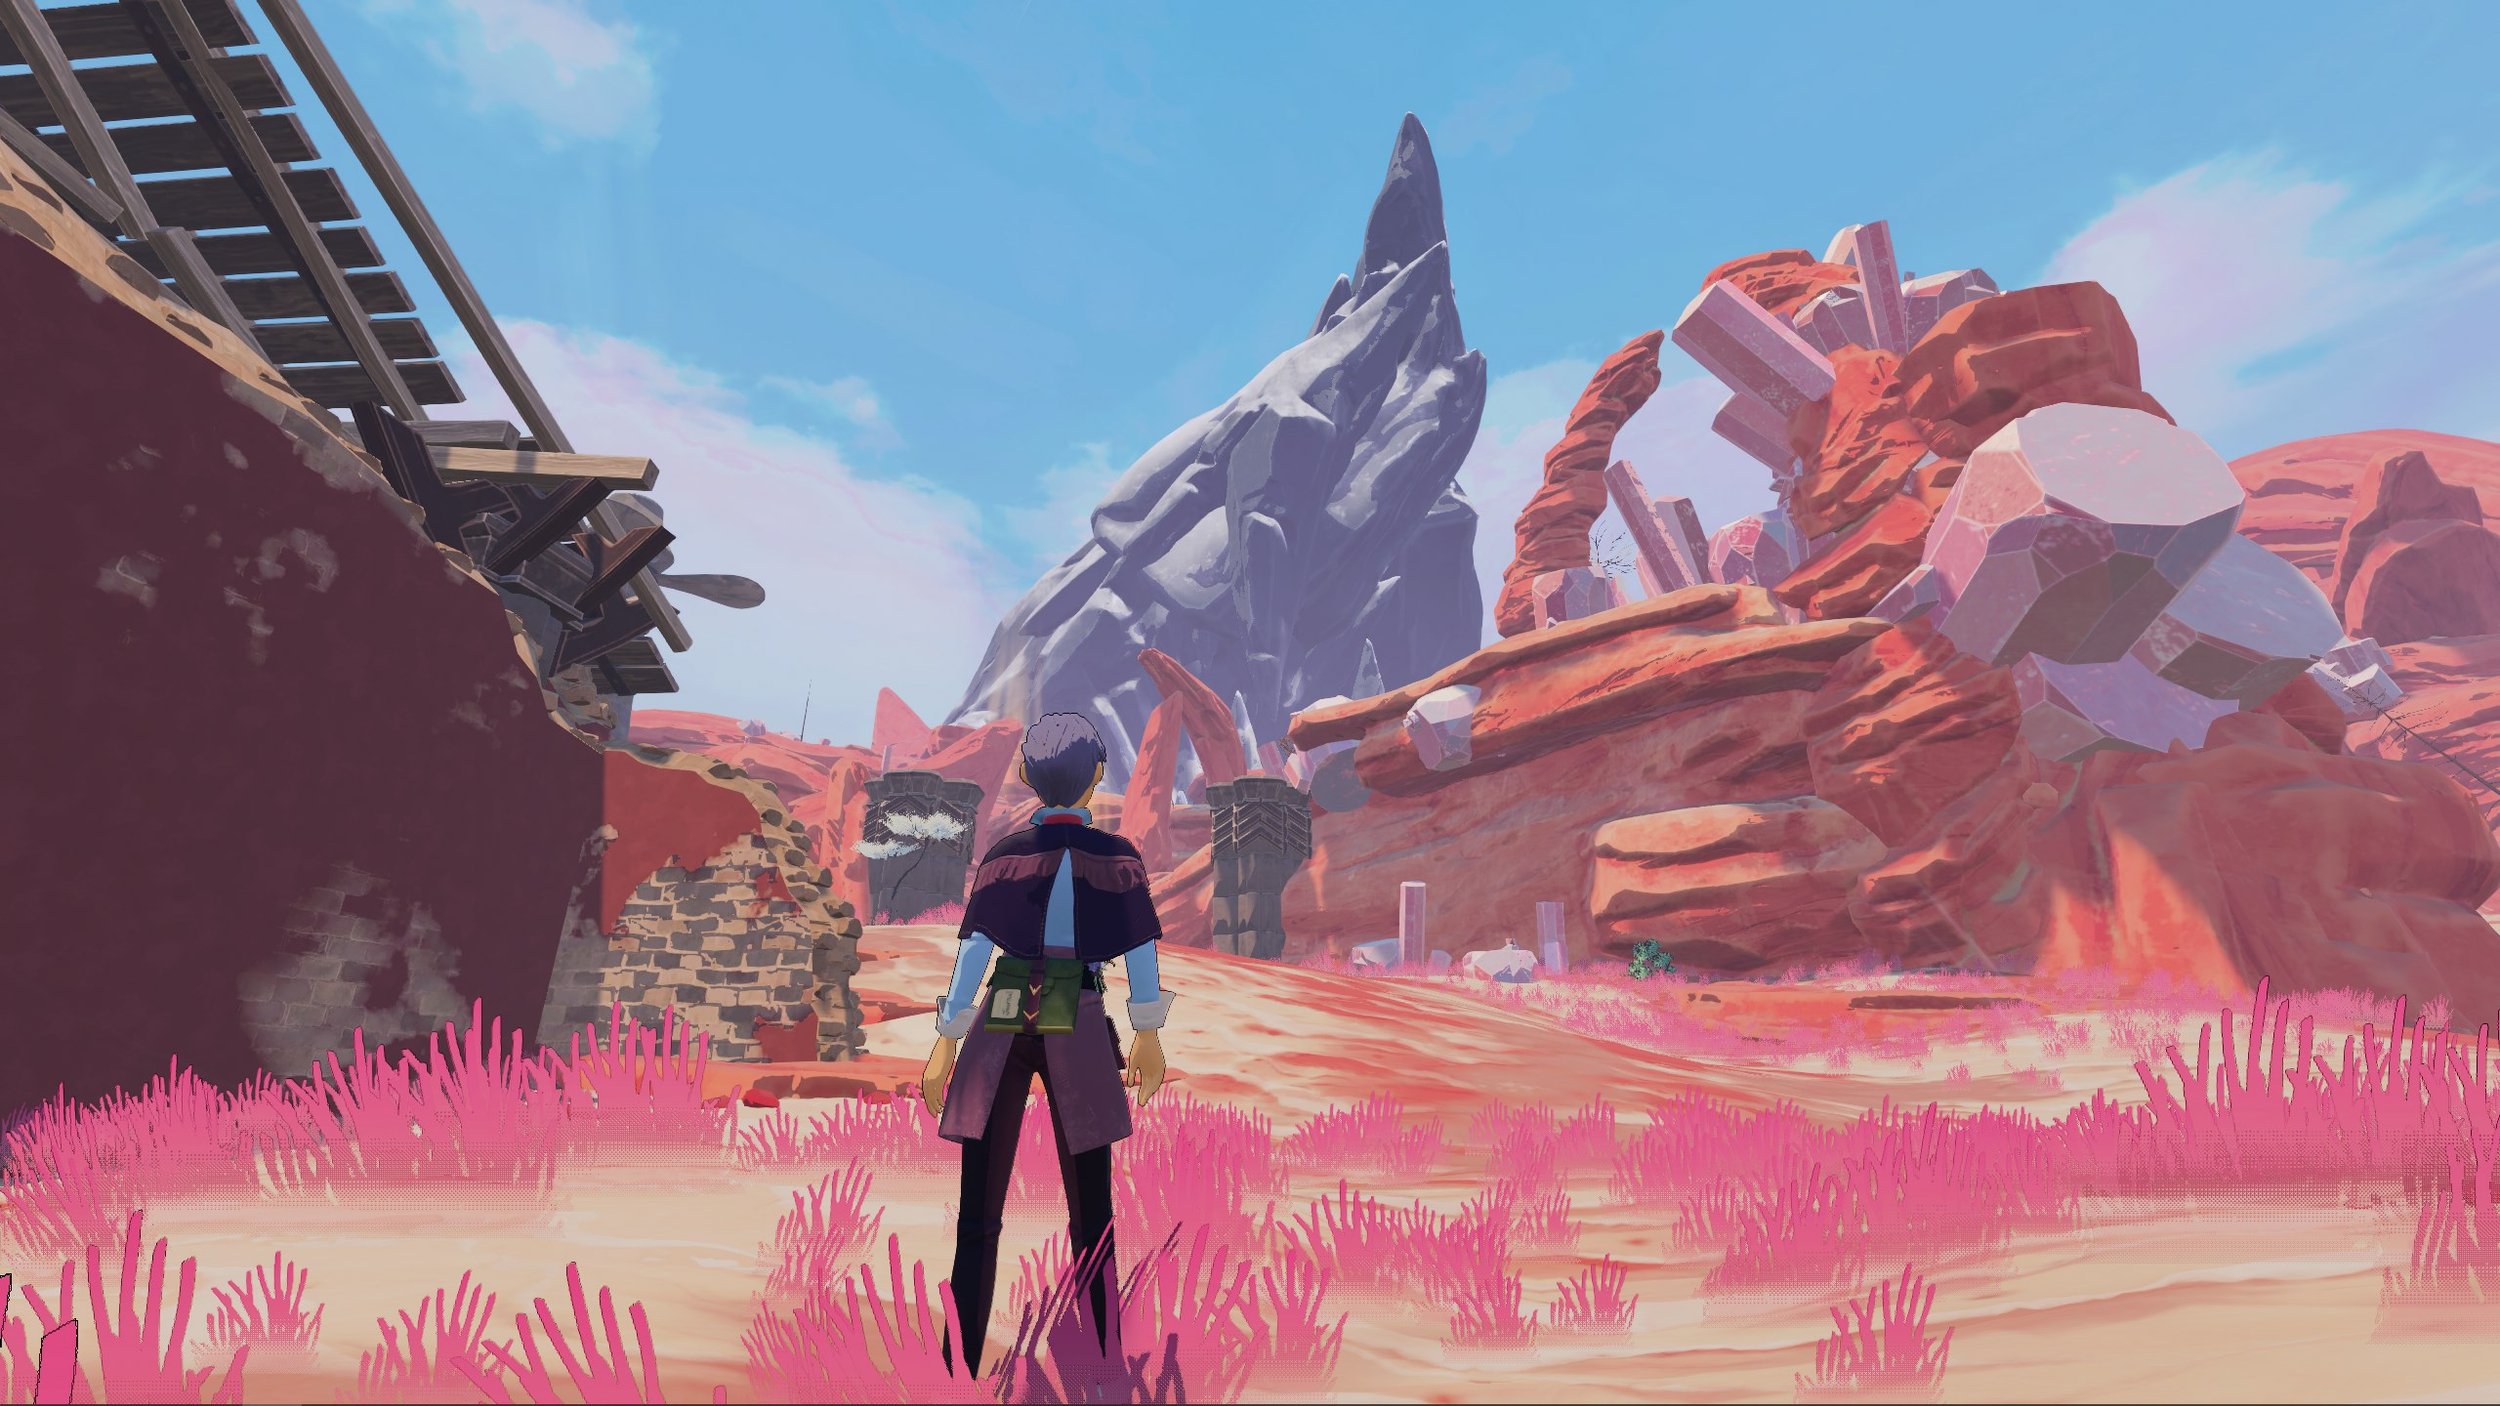  The technique as applied to stucco walls, red desert assets, and the distant mountain. 